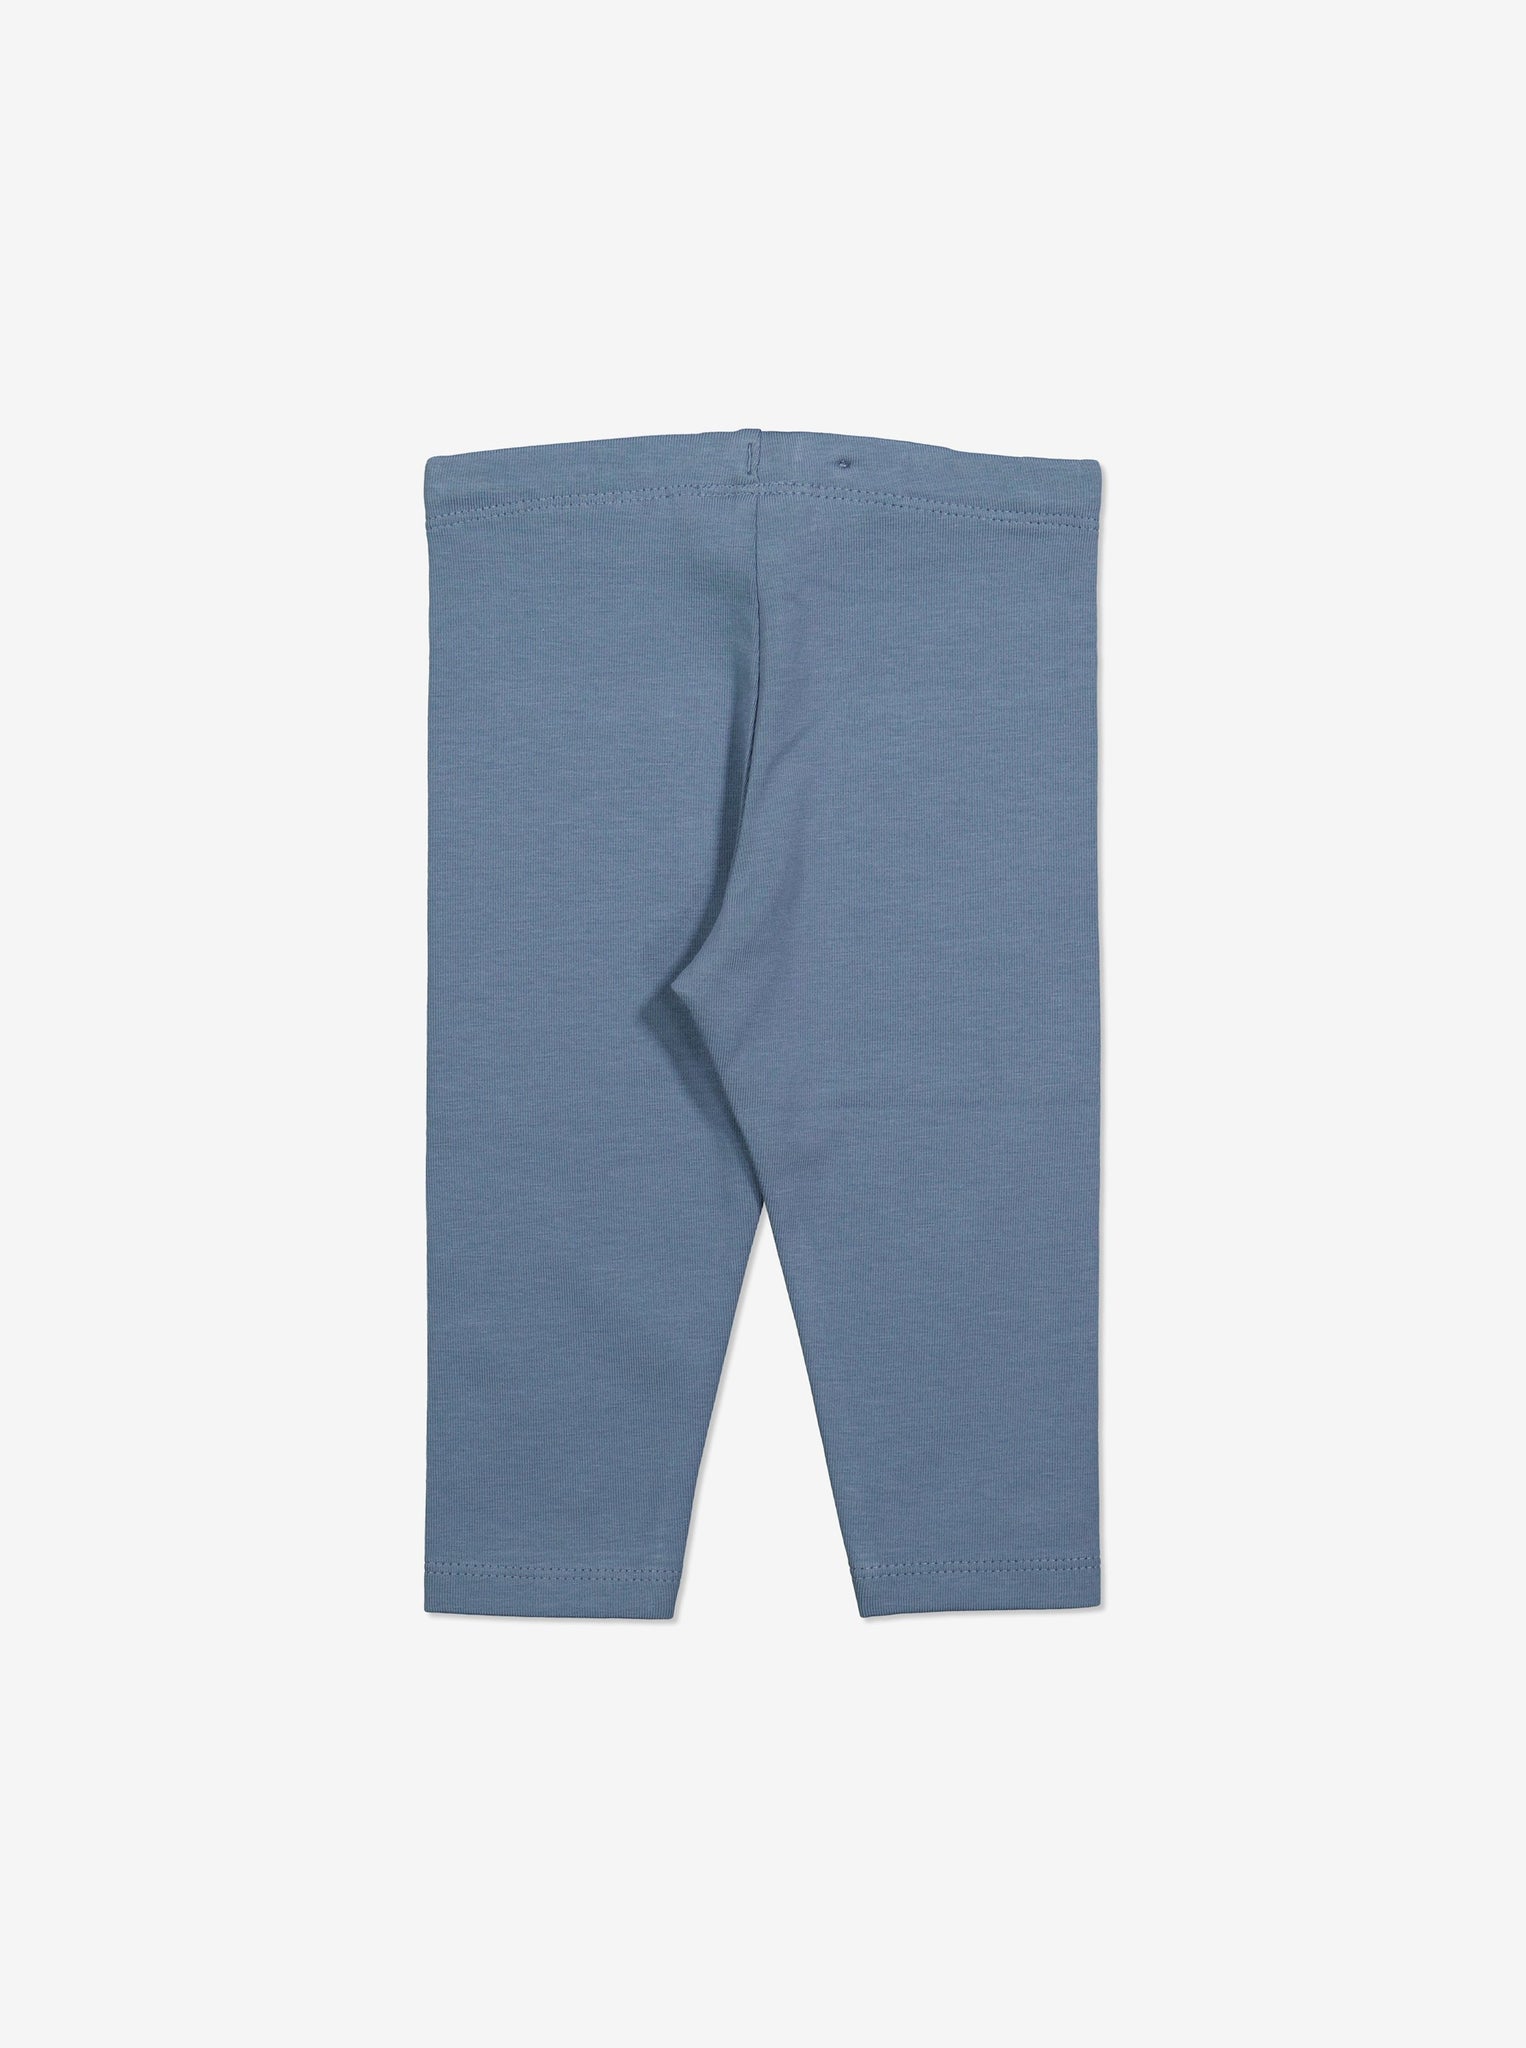  Organic Cotton Blue Kids Leggings from Polarn O. Pyret Kidswear. Made from sustainably sourced materials.